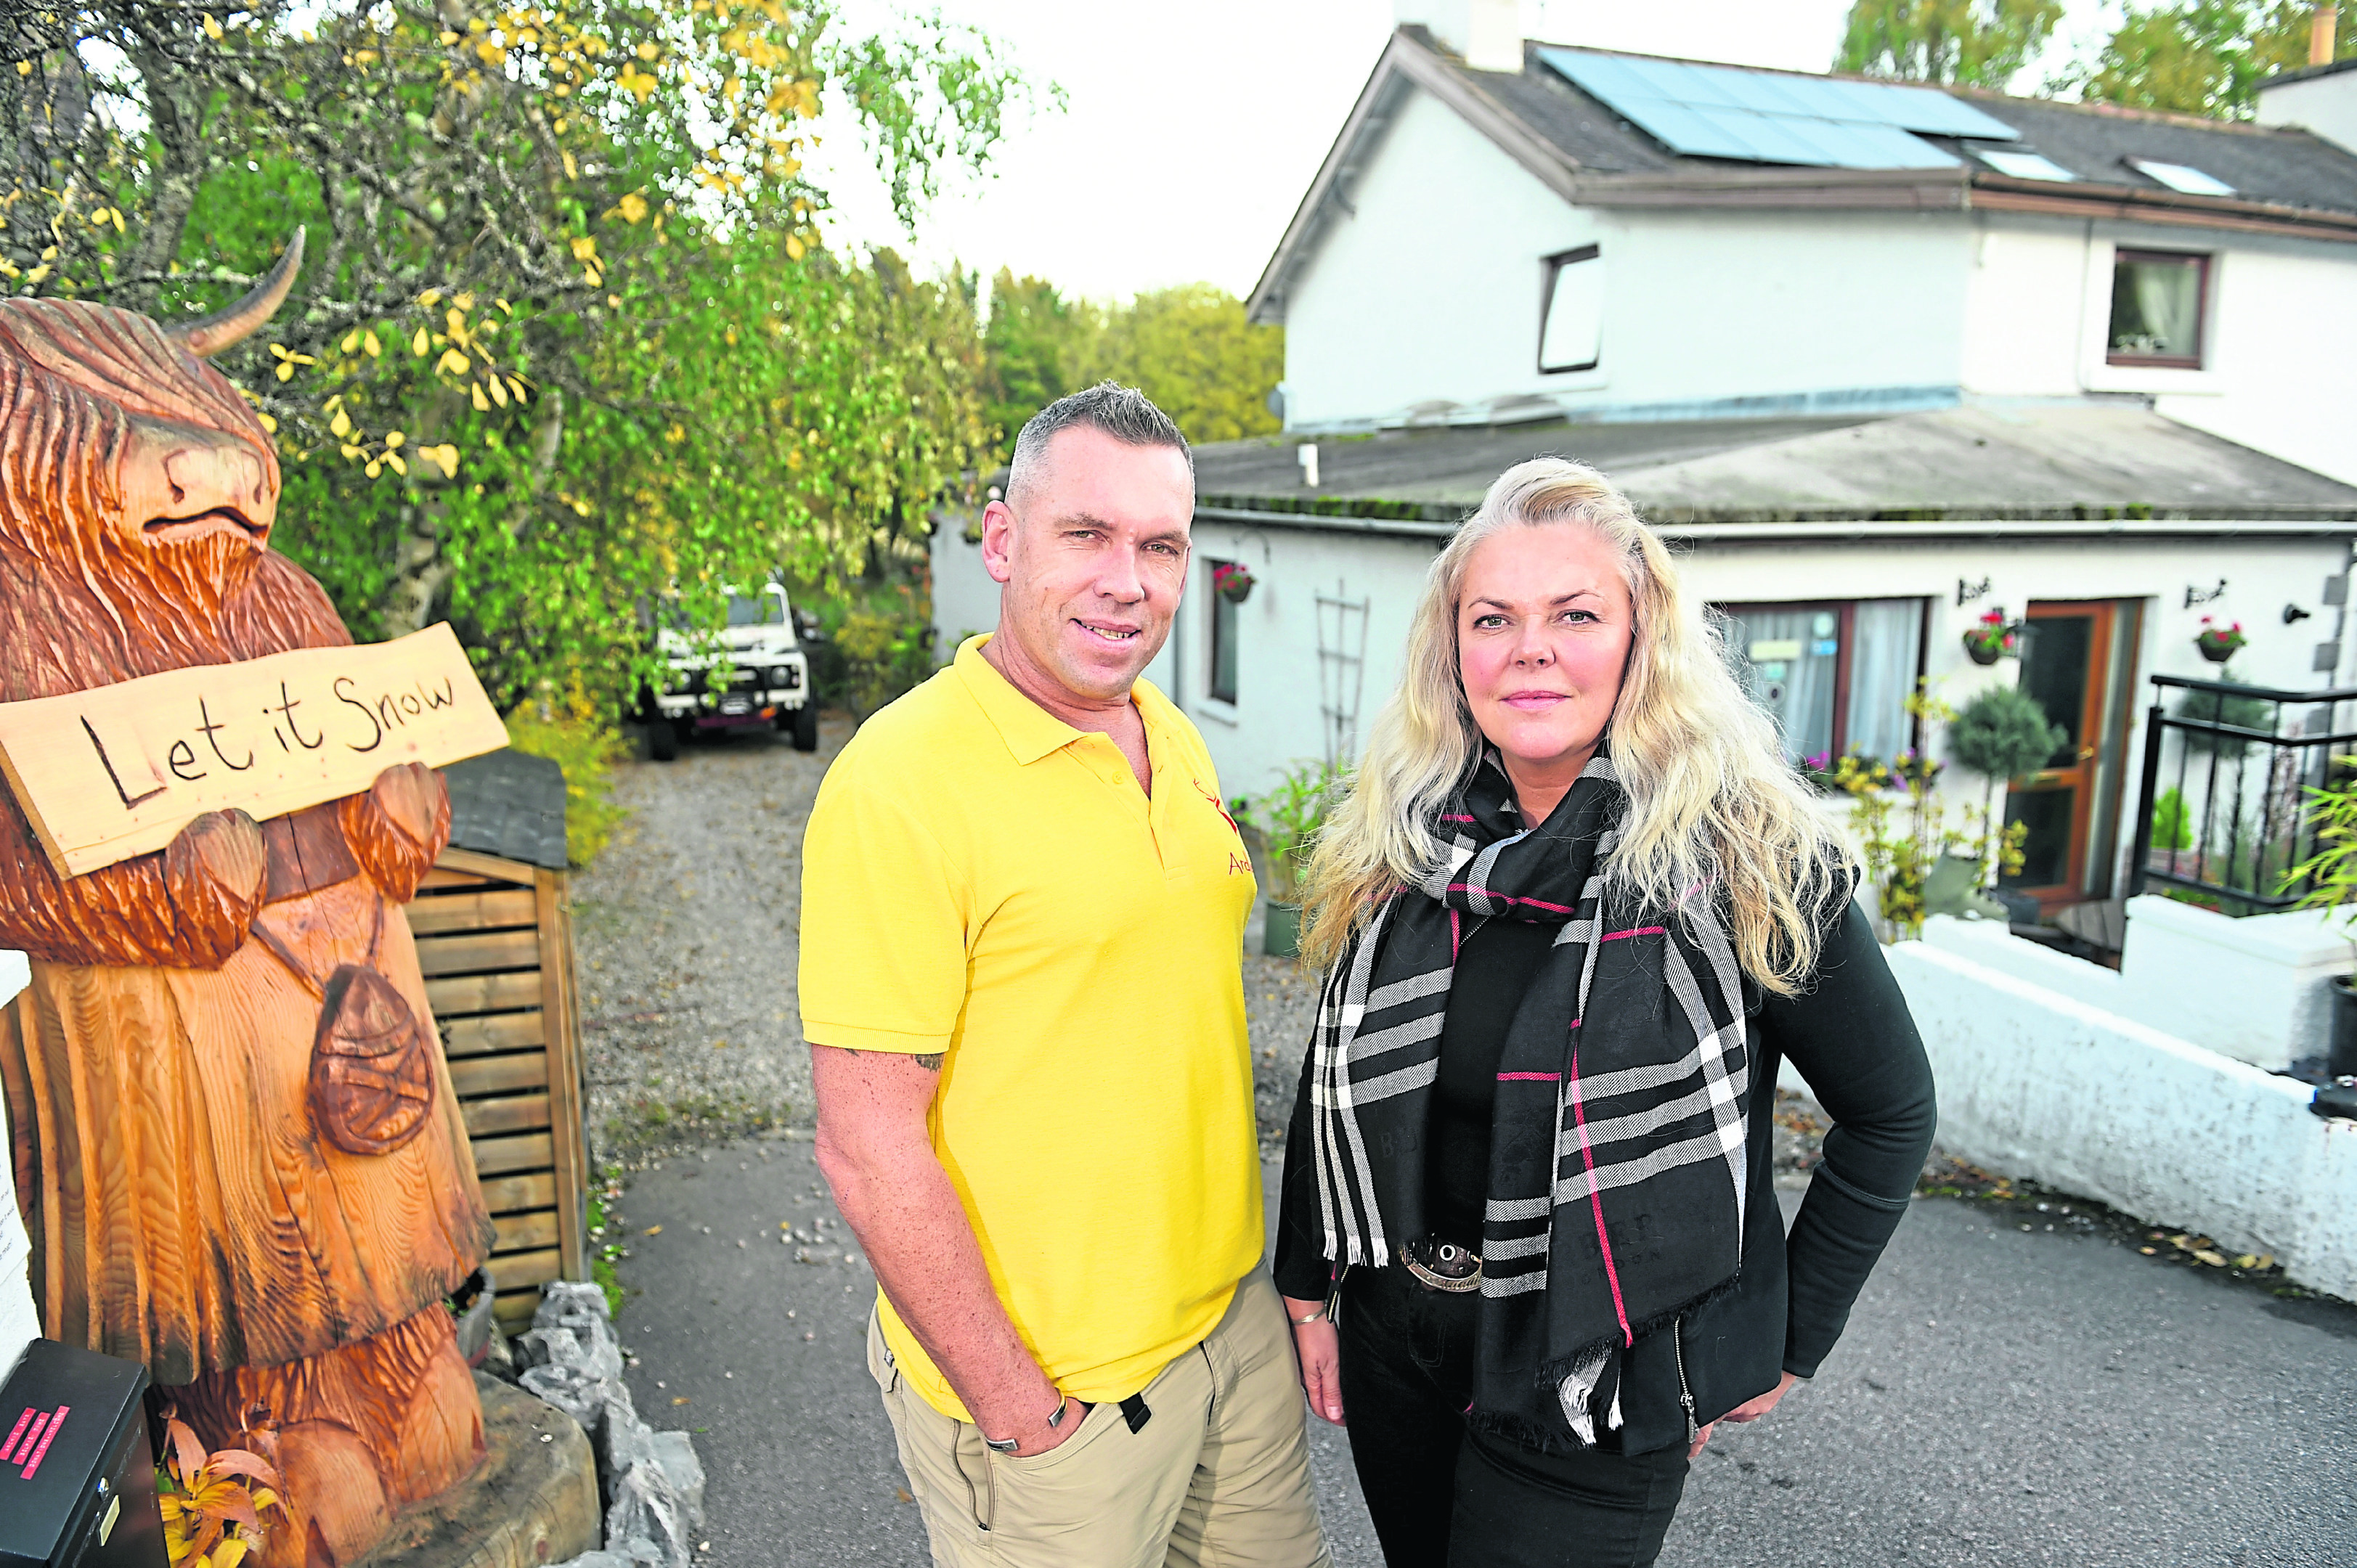 Aviemore guest house owners Kevin and Kirsty Whyte of the Ardlogie Guest House.